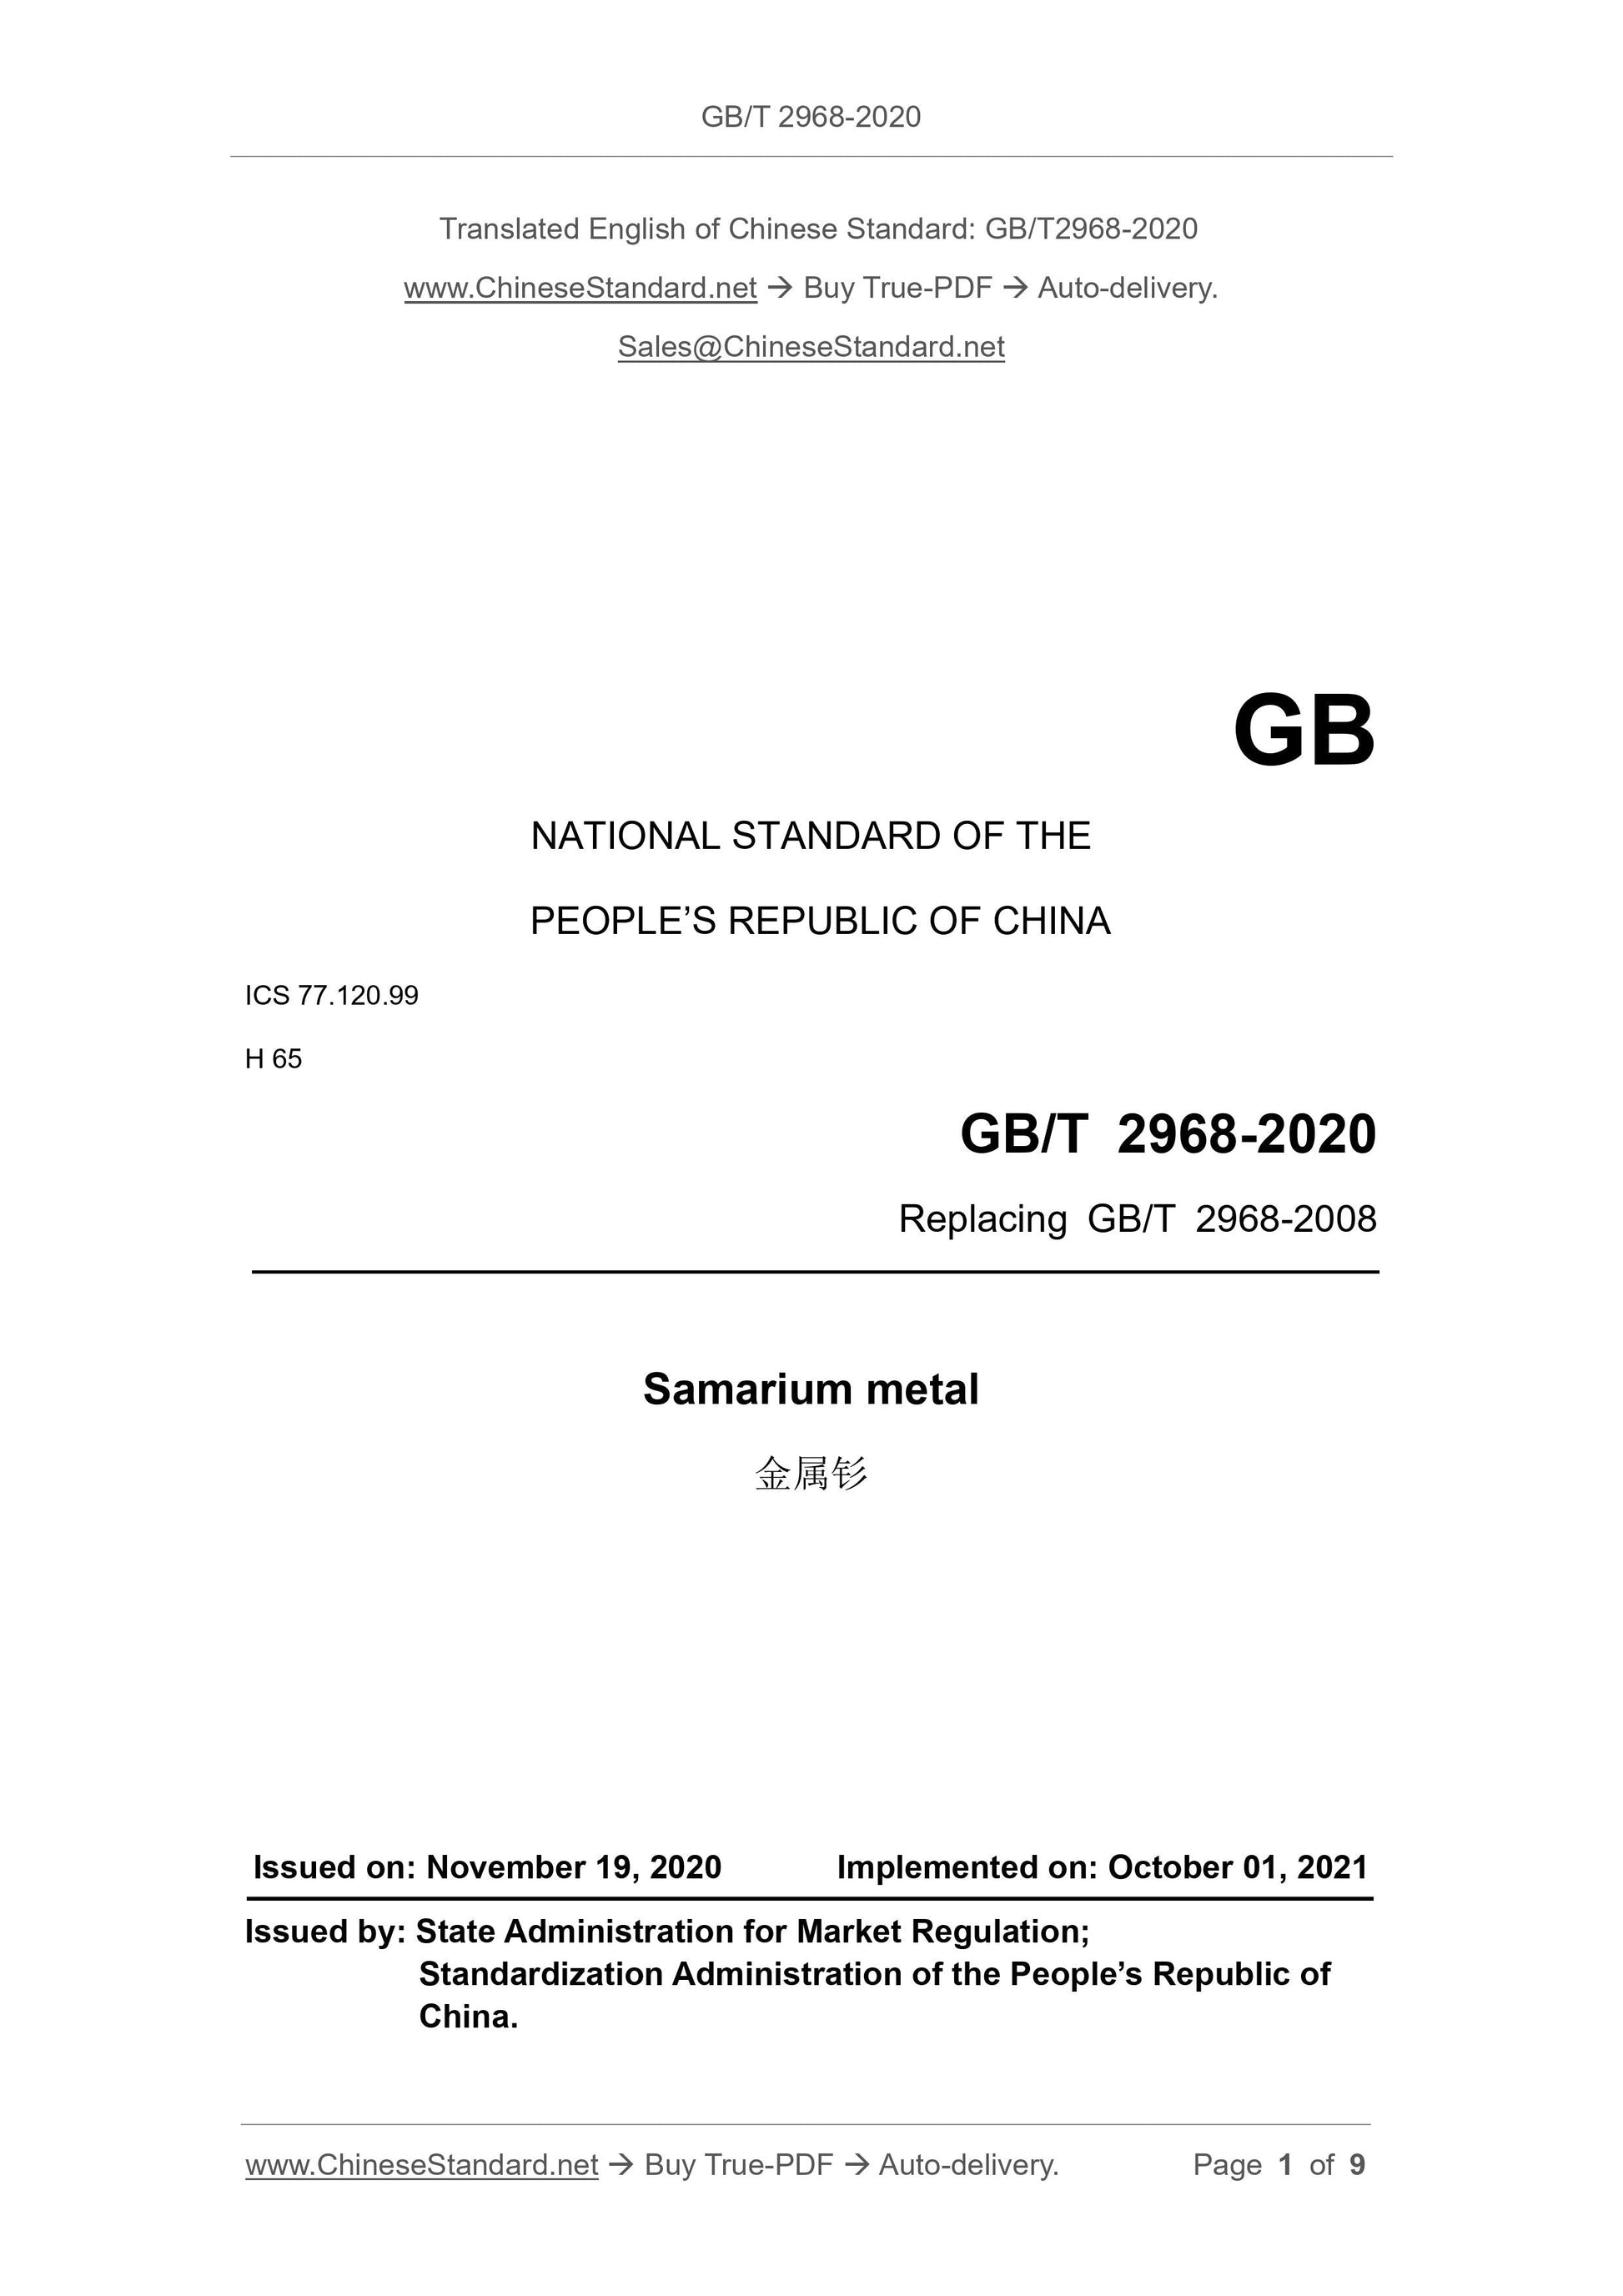 GB/T 2968-2020 Page 1